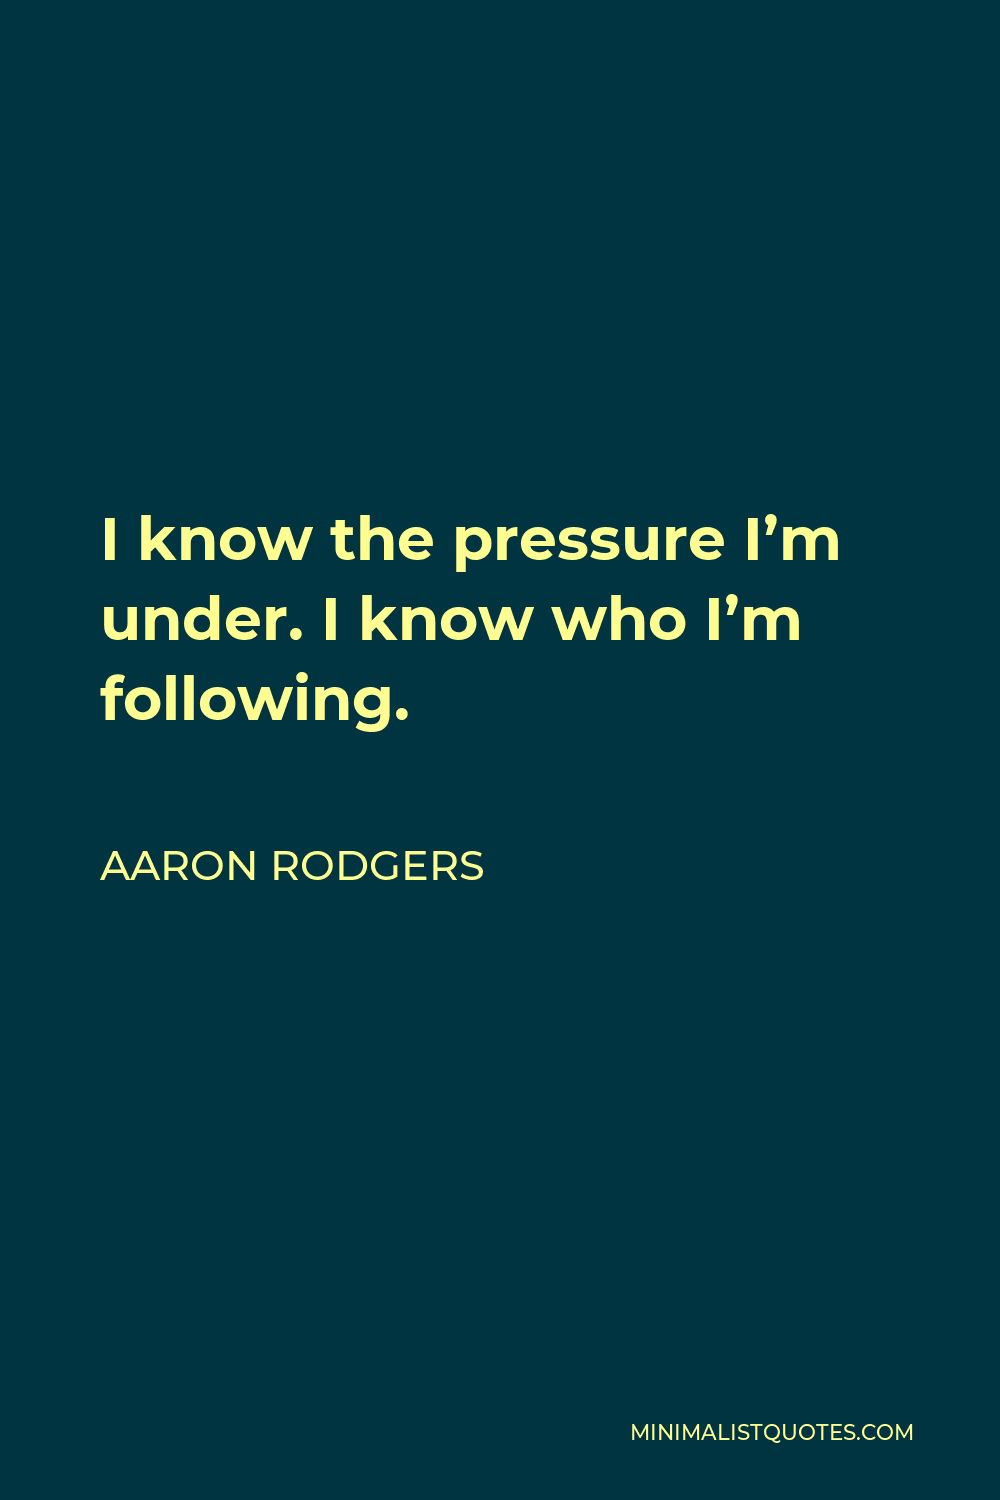 Aaron Rodgers Quote - I know the pressure I’m under. I know who I’m following.